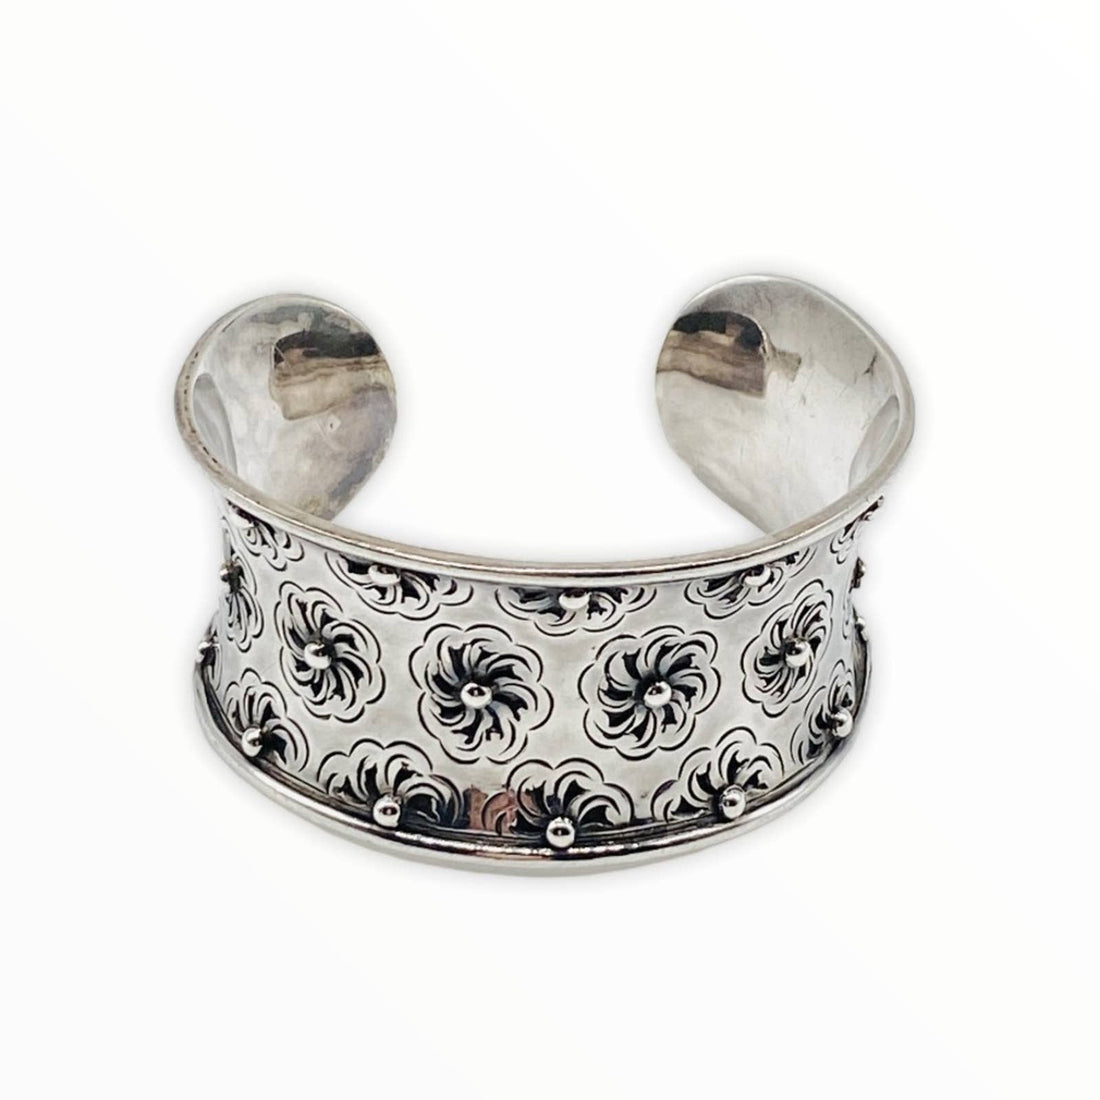 Sterling Silver Cuff Bracelet with floral design by hipV Modern Vintage Jewelry.